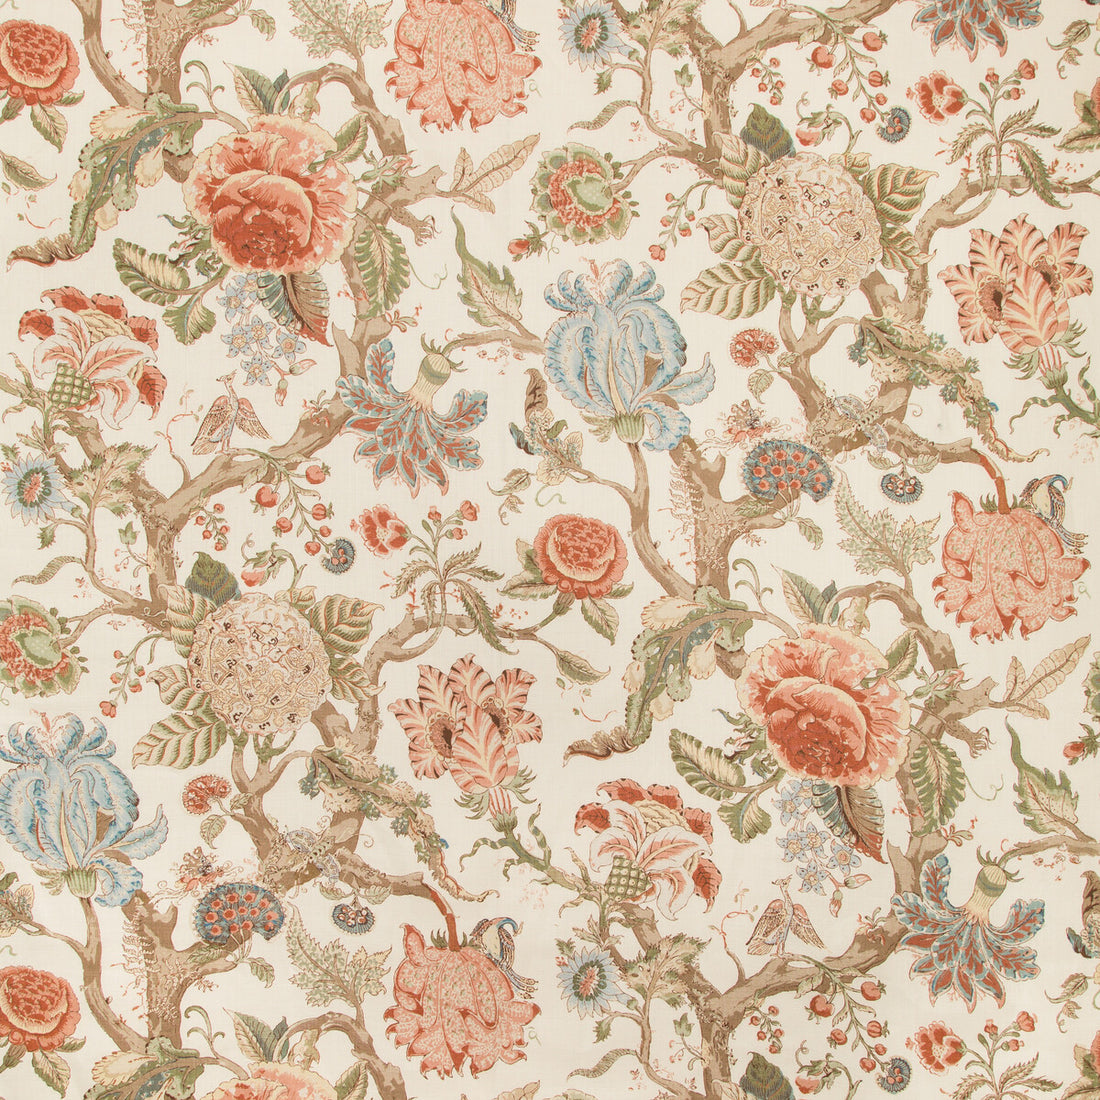 Adlington fabric in coral color - pattern 2019102.123.0 - by Lee Jofa in the Manor House collection